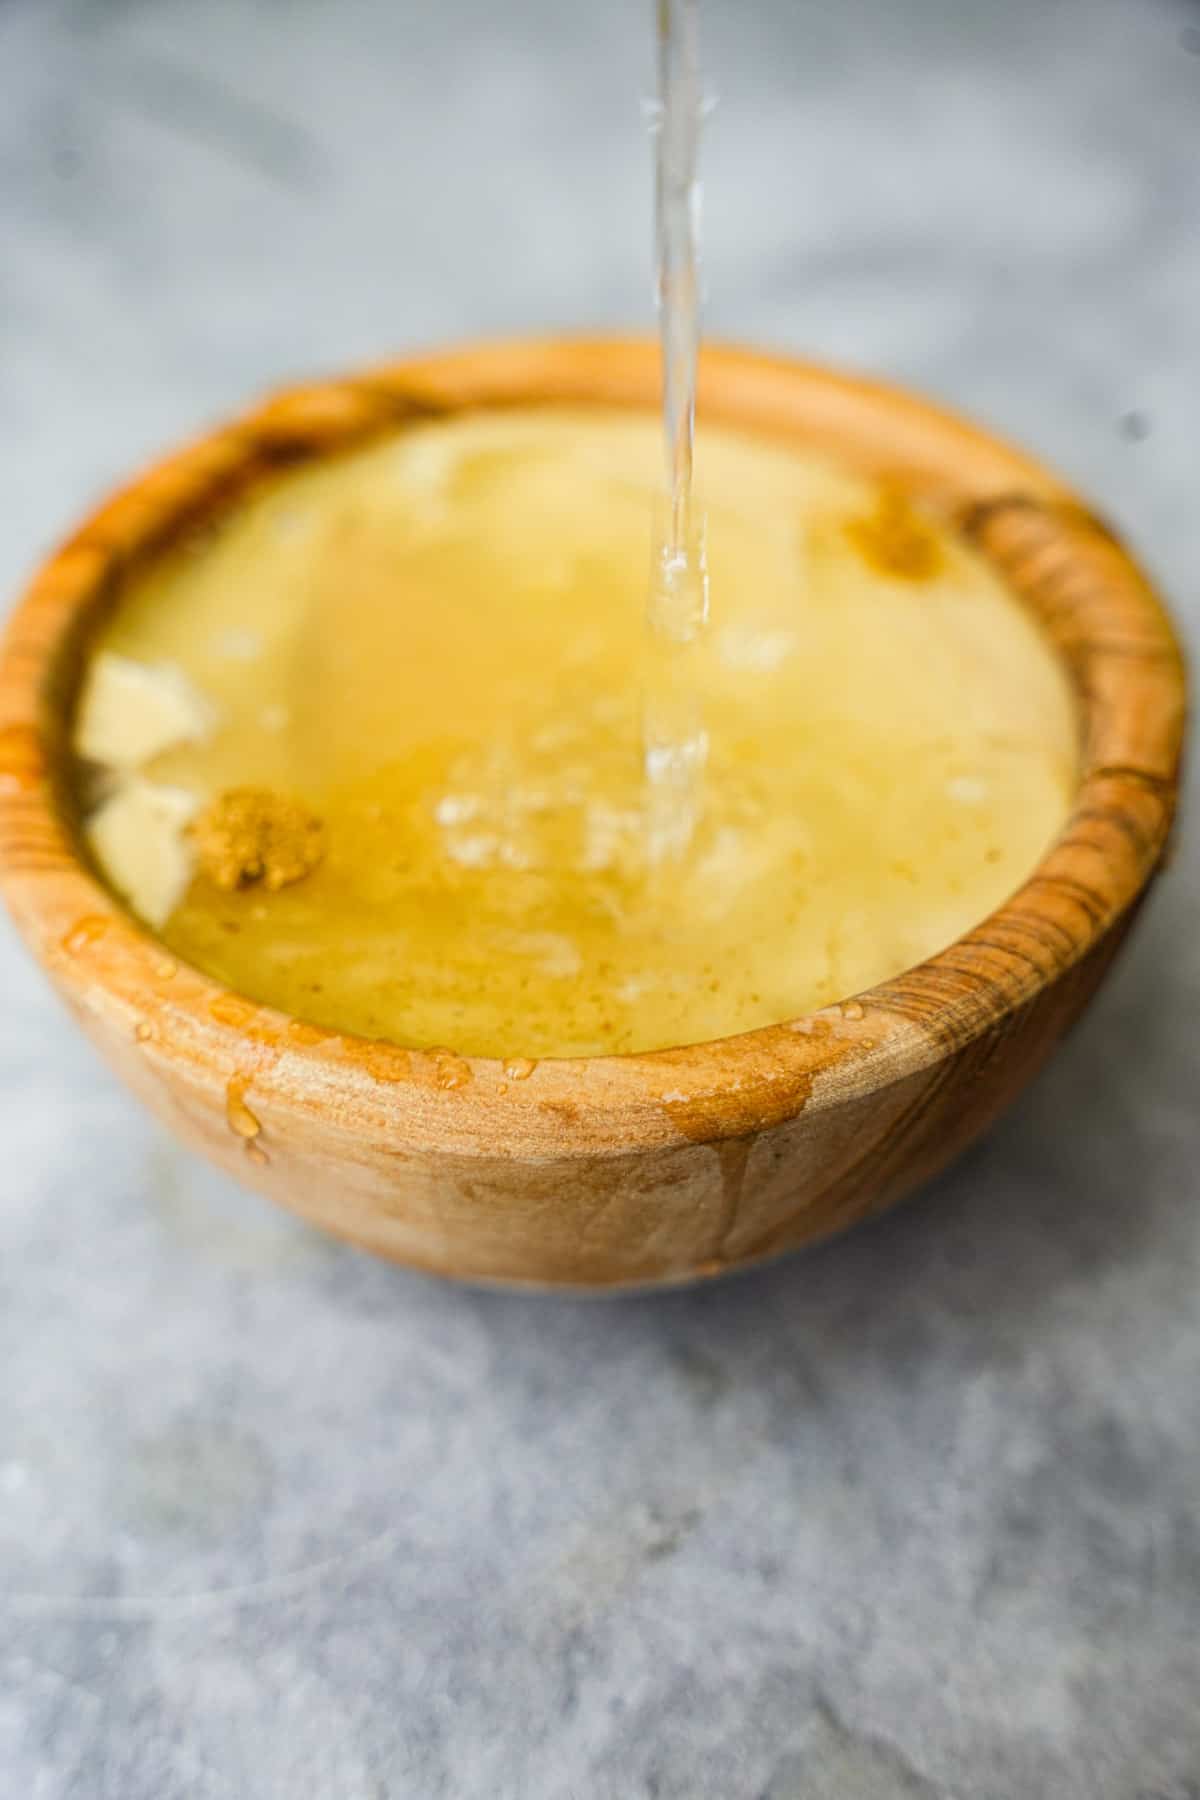 water is added to the tahini sauce ingredients in a wooden bowl.